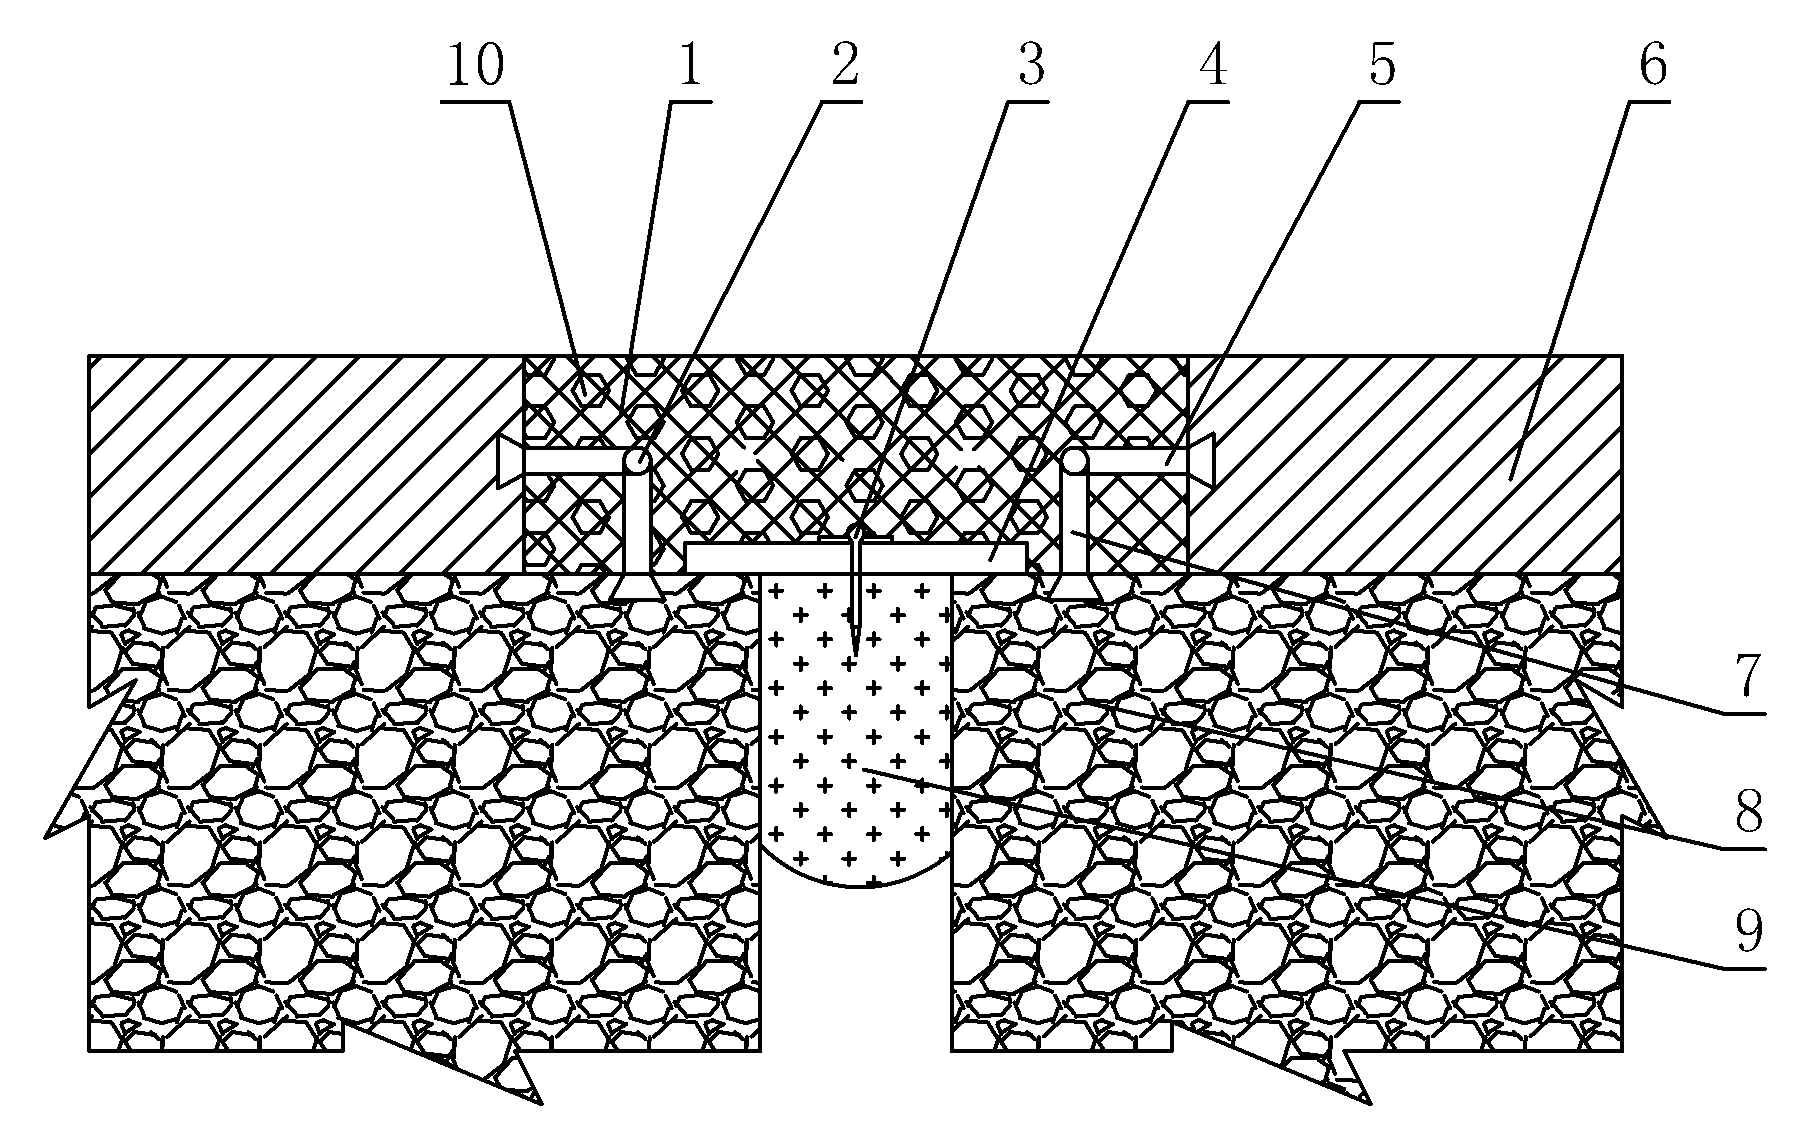 Elastoplastic device for expansion joints in buildings and road engineering